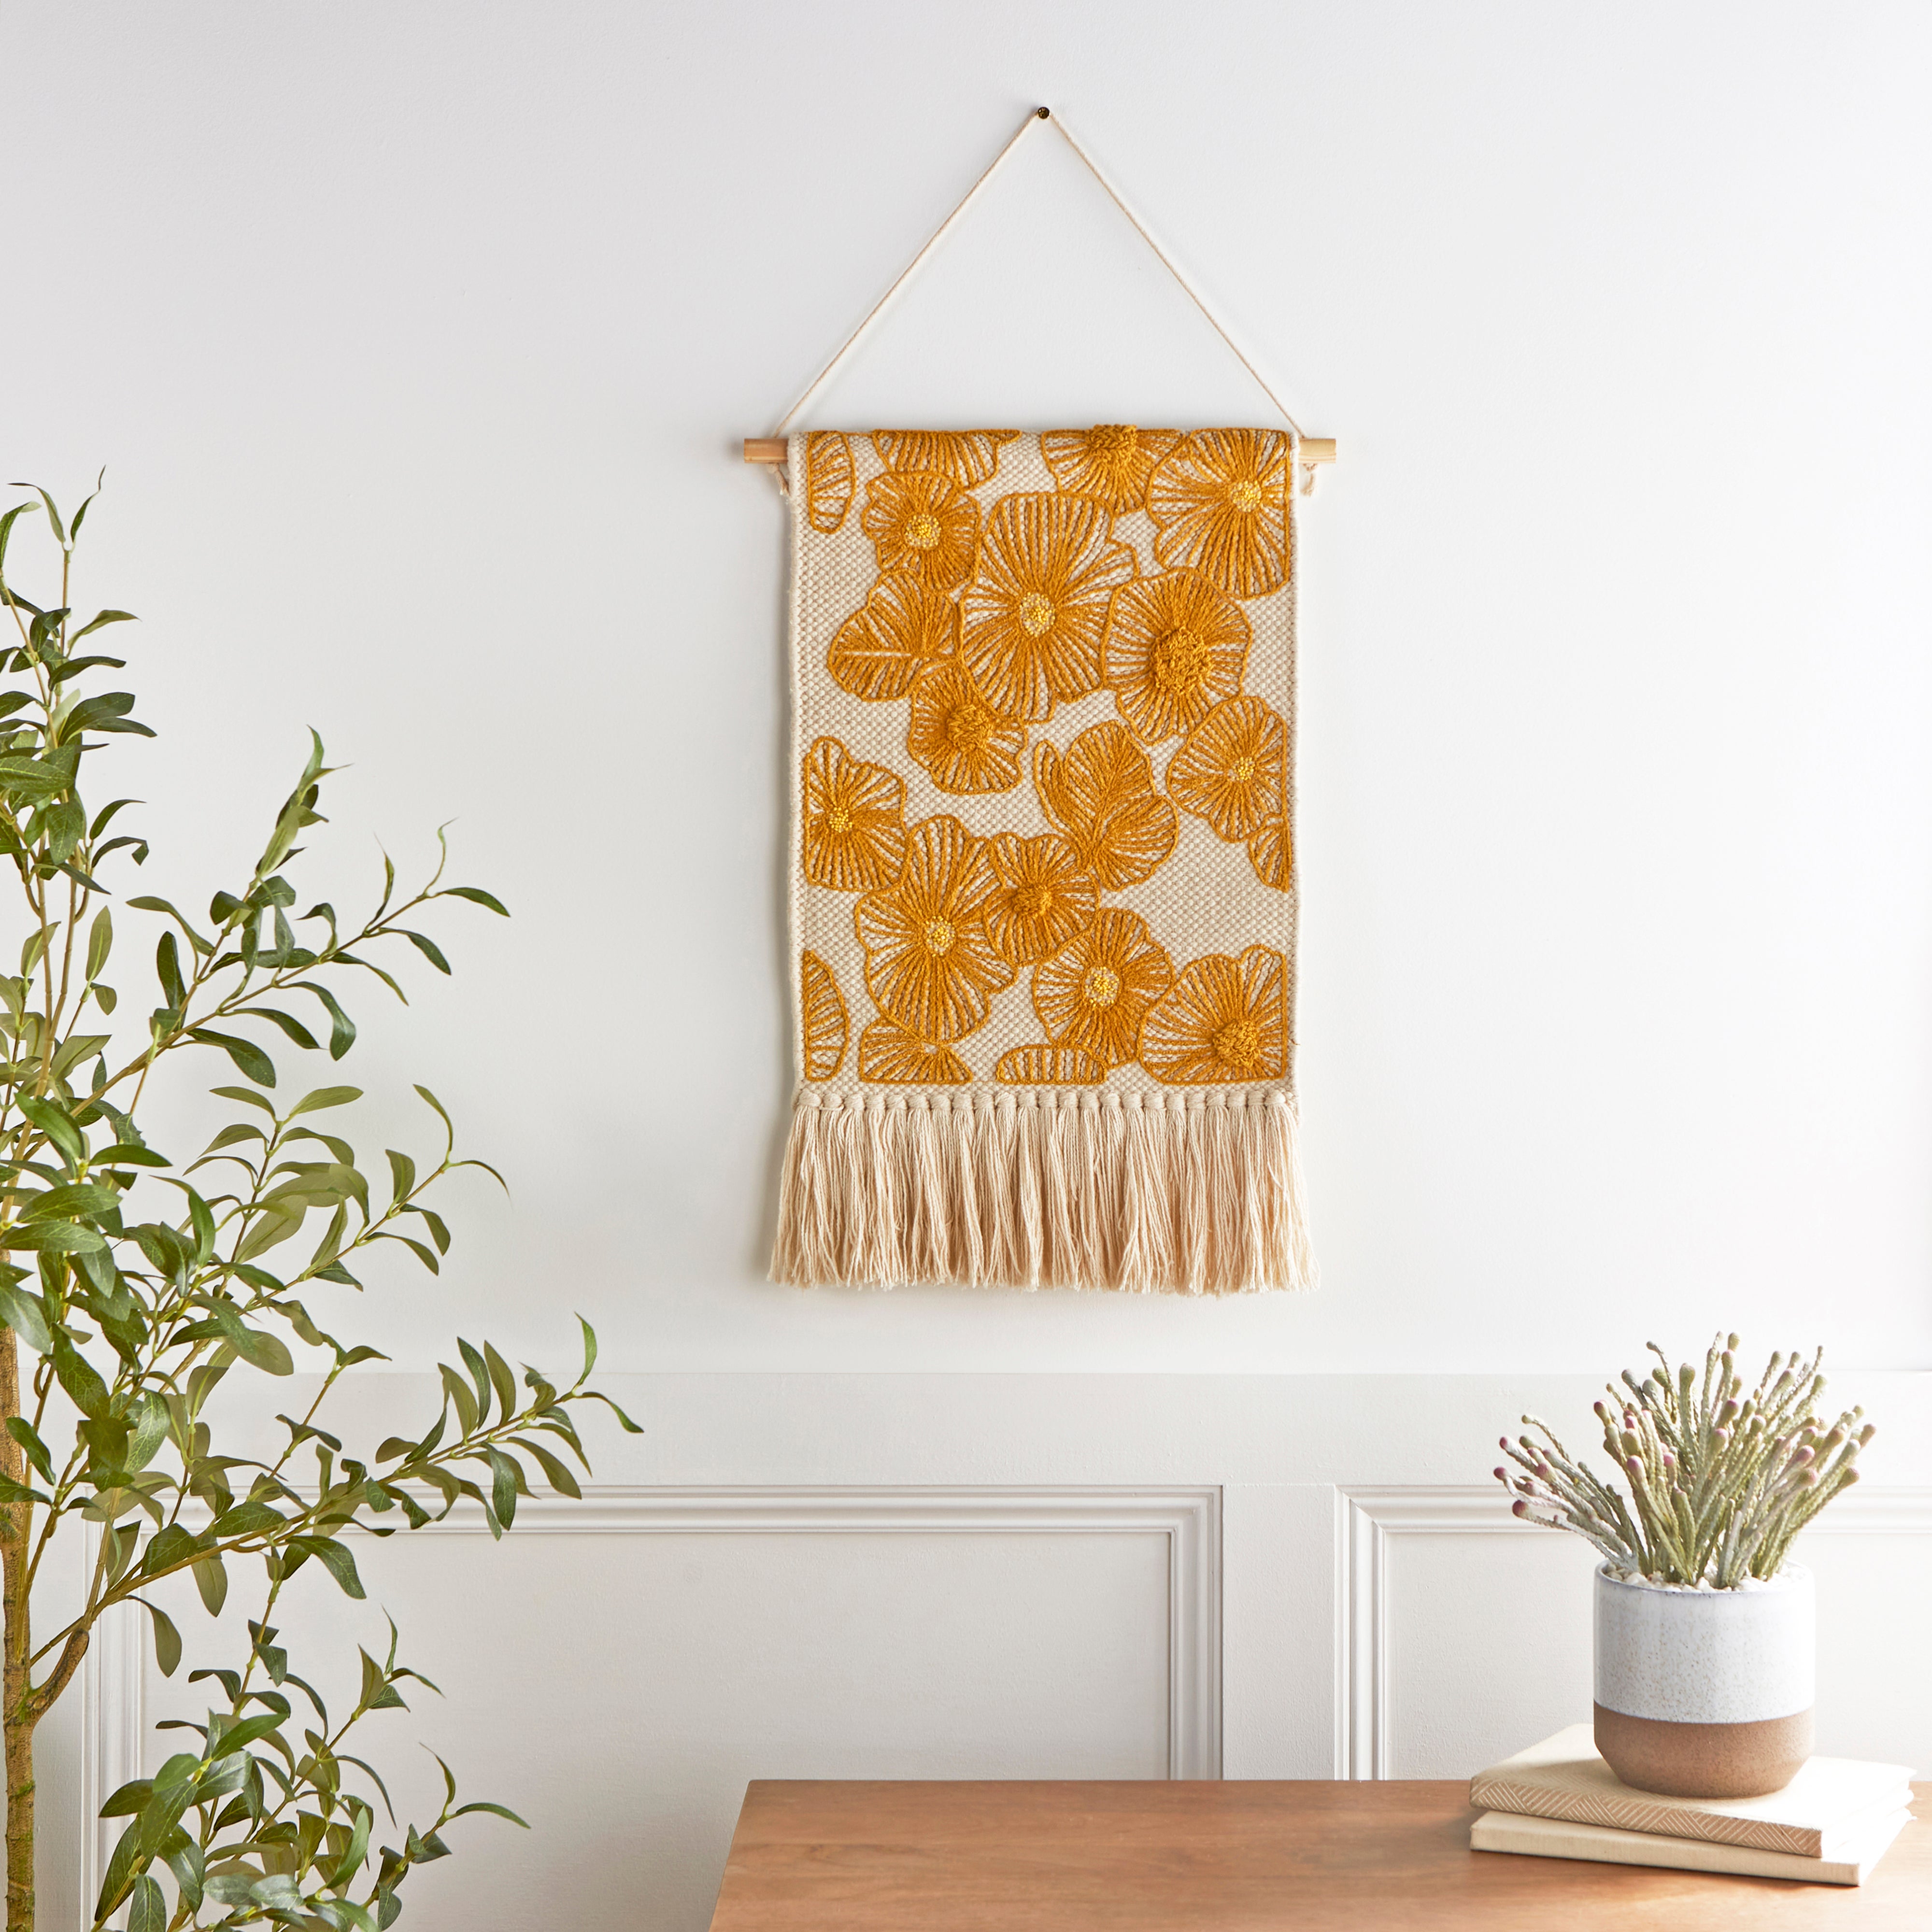 Embroidered Flower Ochre Wall Hanging